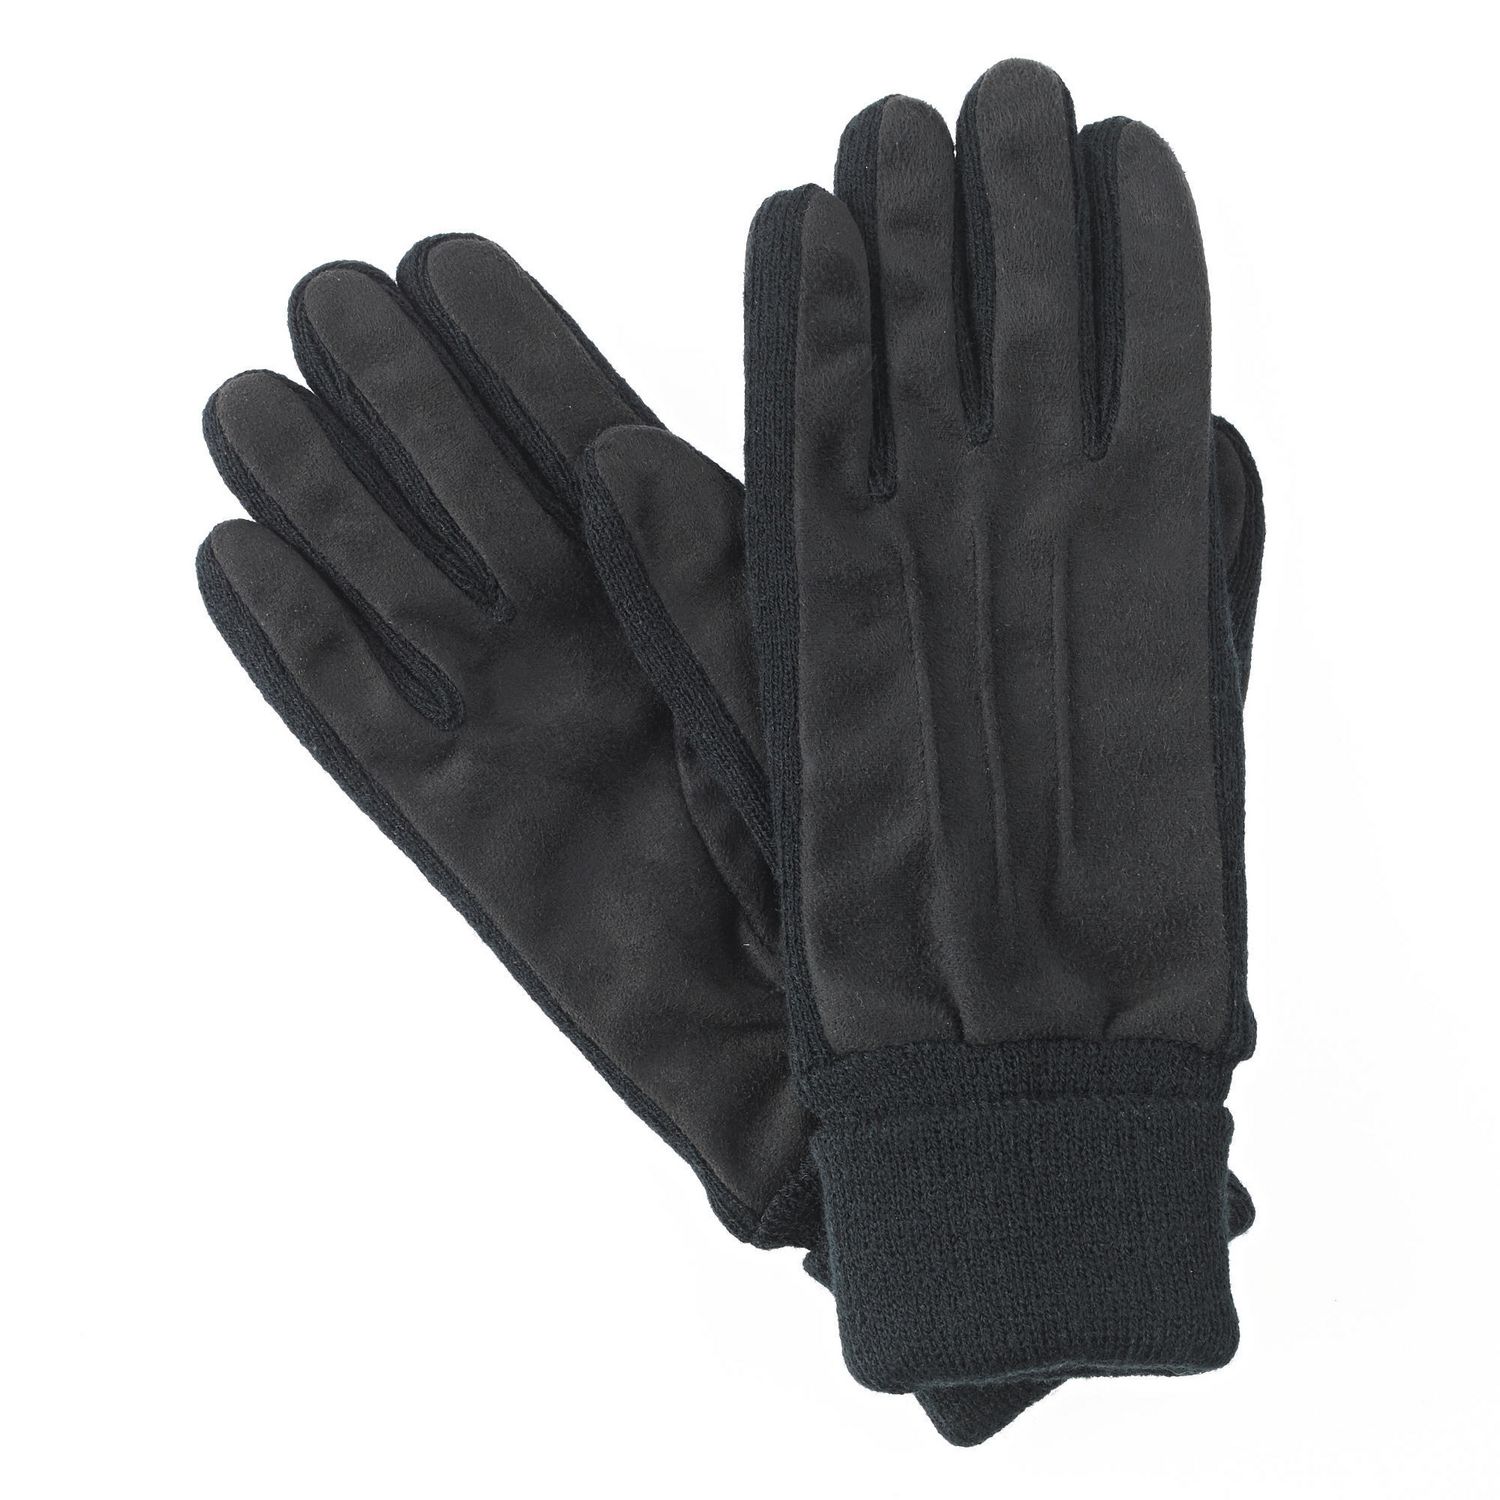 ISOfit by isotoner® Women's Faux Suede/Knit Gloves | Walmart Canada